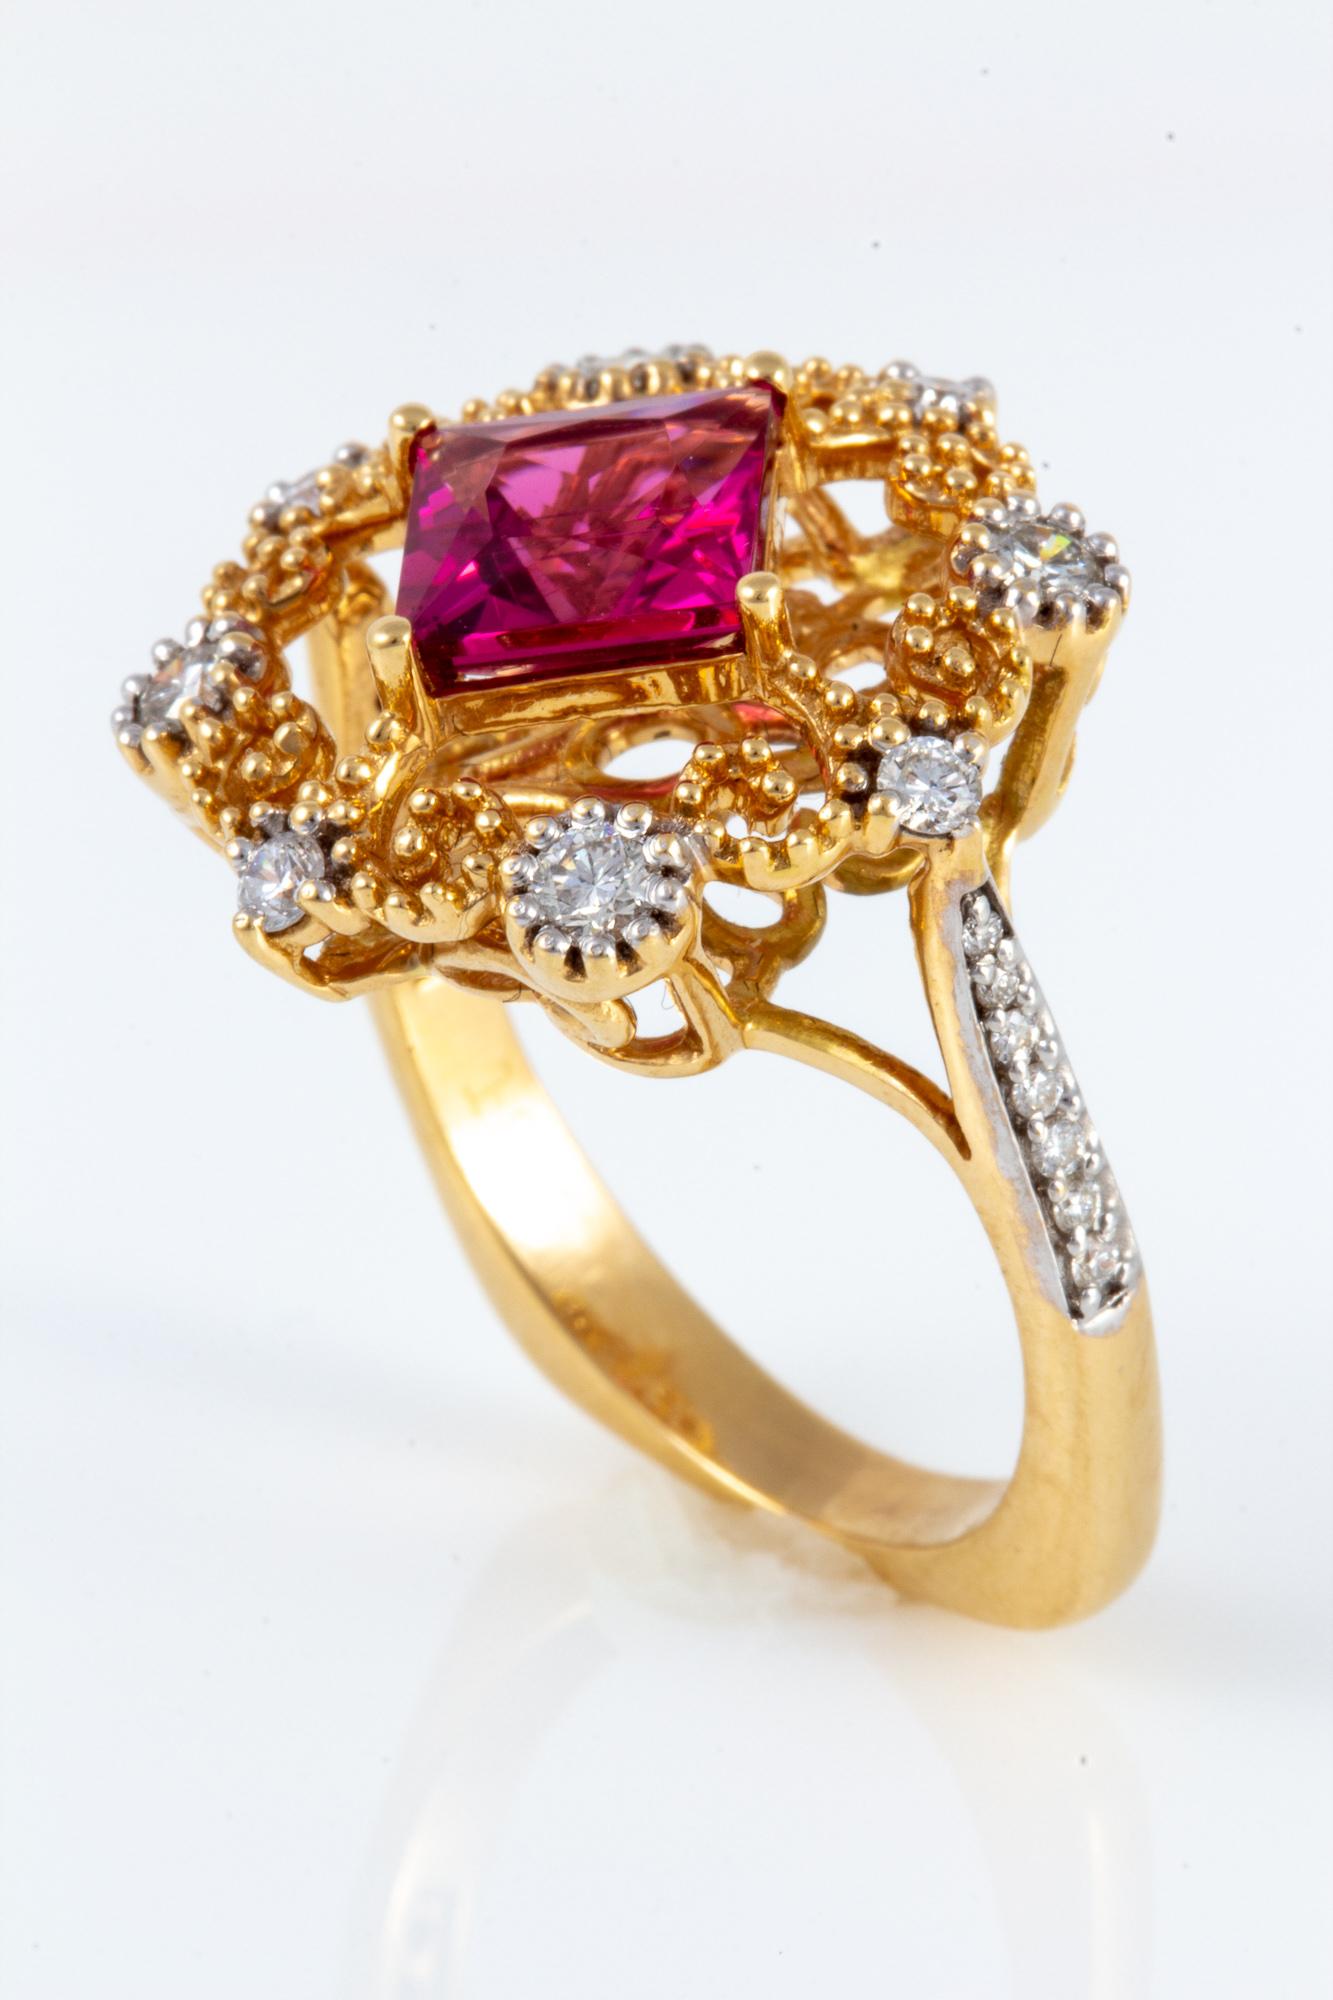 Rubellite Tourmaline and Diamond Ring set in 18 kt Gold For Sale 5